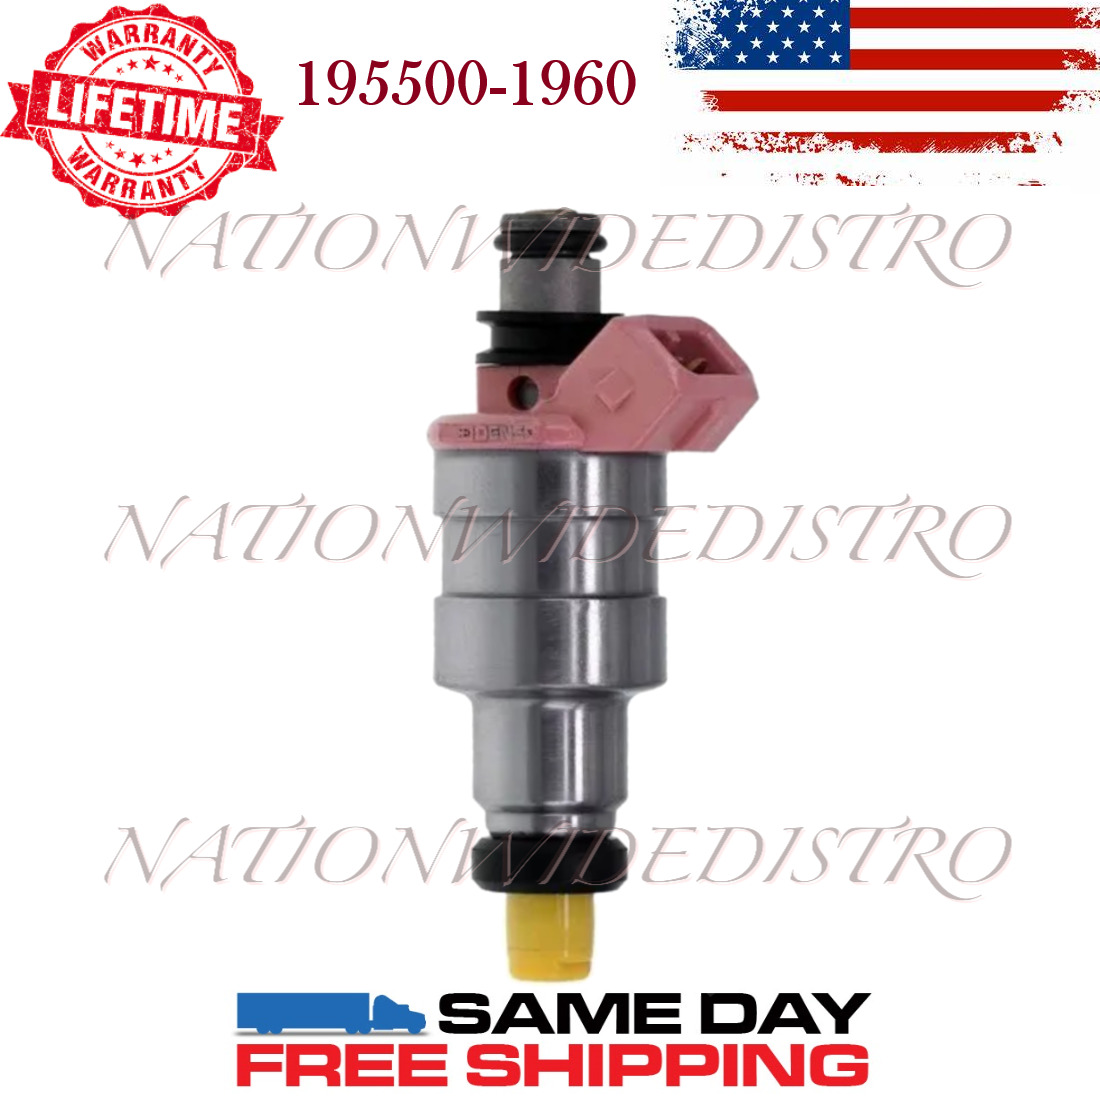 1x OEM Denso Fuel Injector for 1989-1995 Ford Taurus 3.0L V6 195500-1960